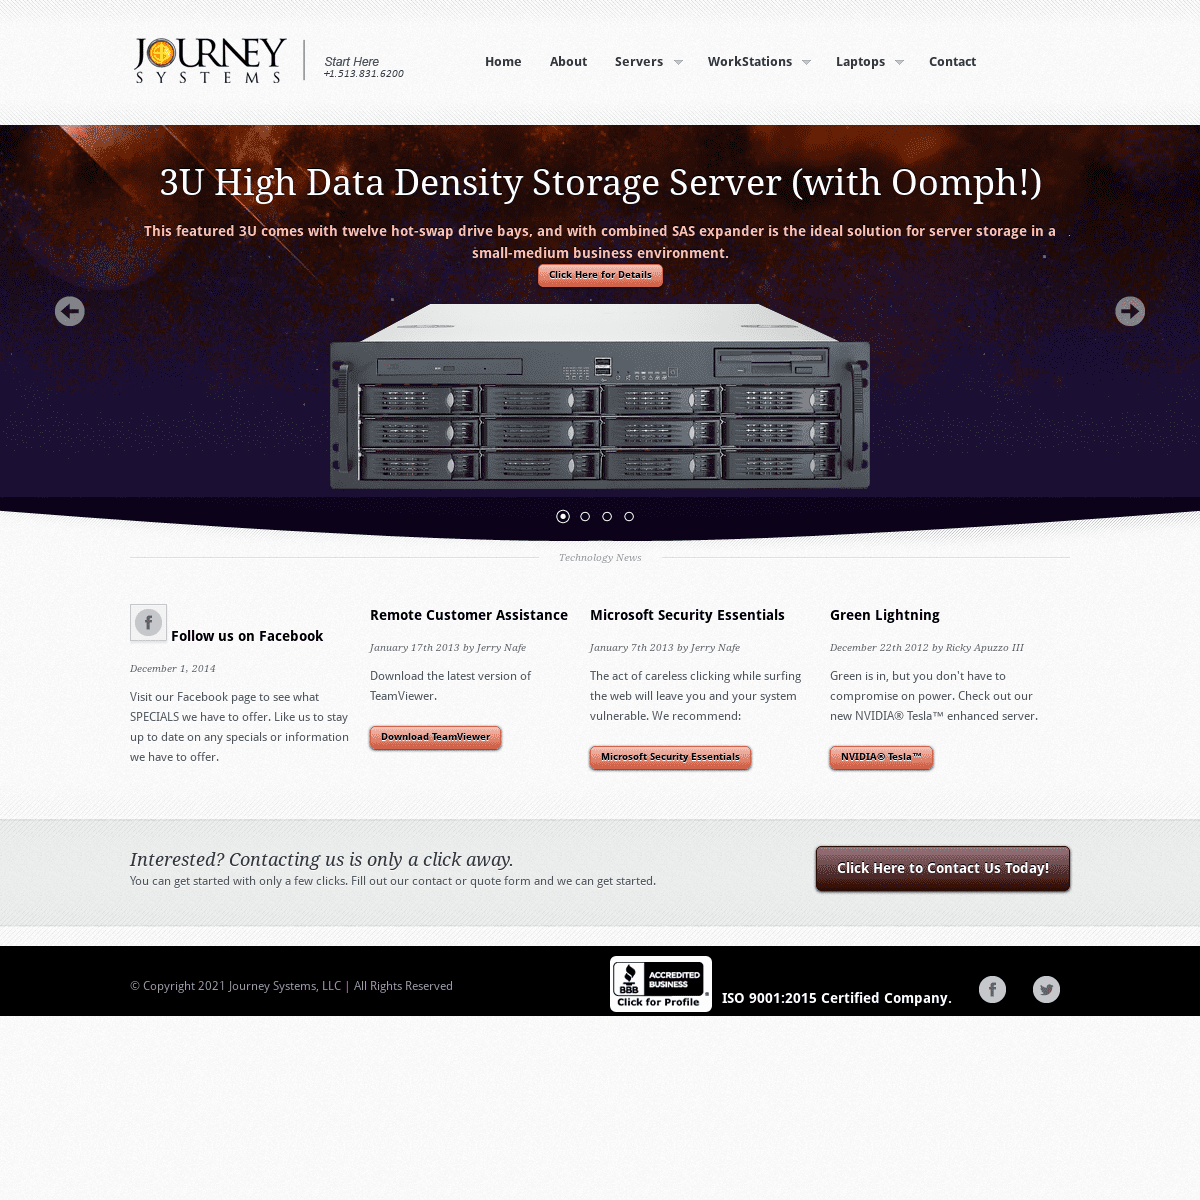 A complete backup of https://journeysystems.com